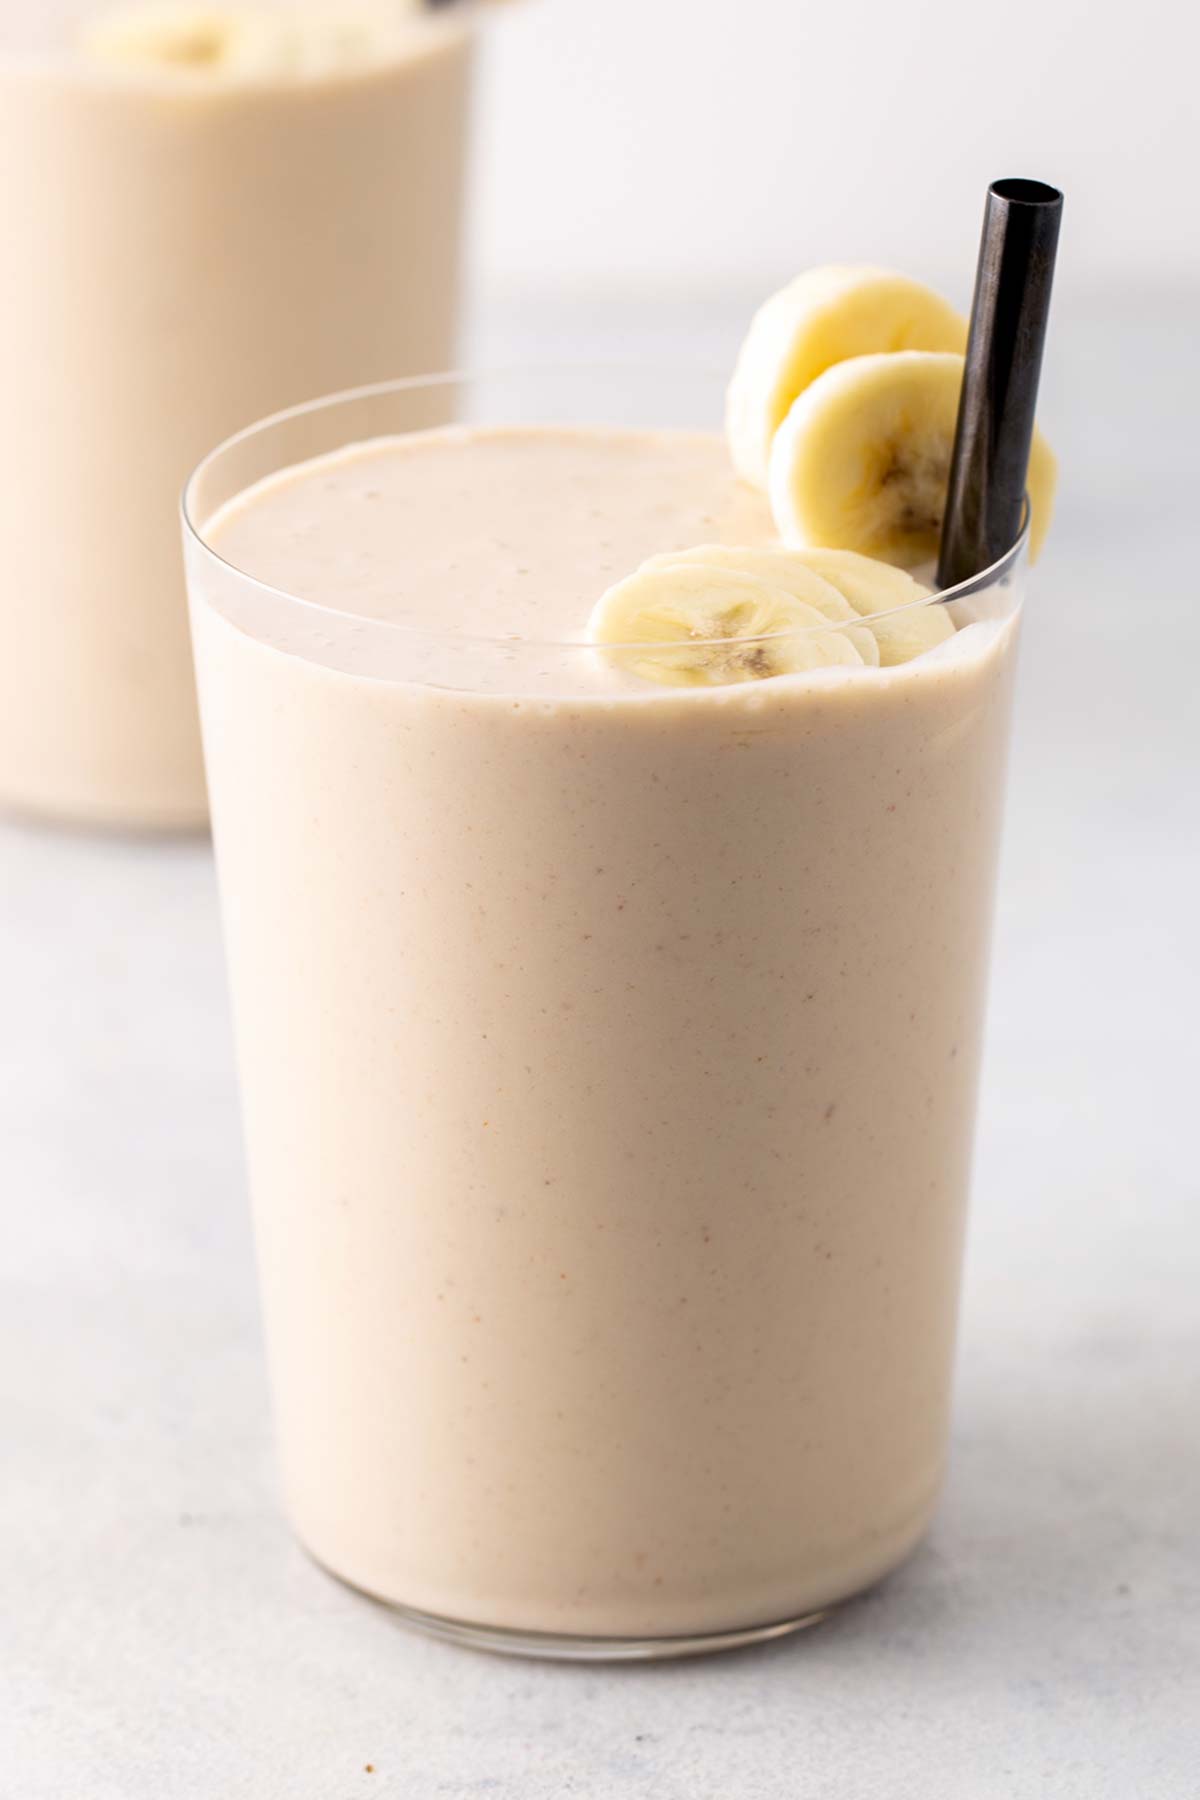 Peanut butter smoothie in a glass.